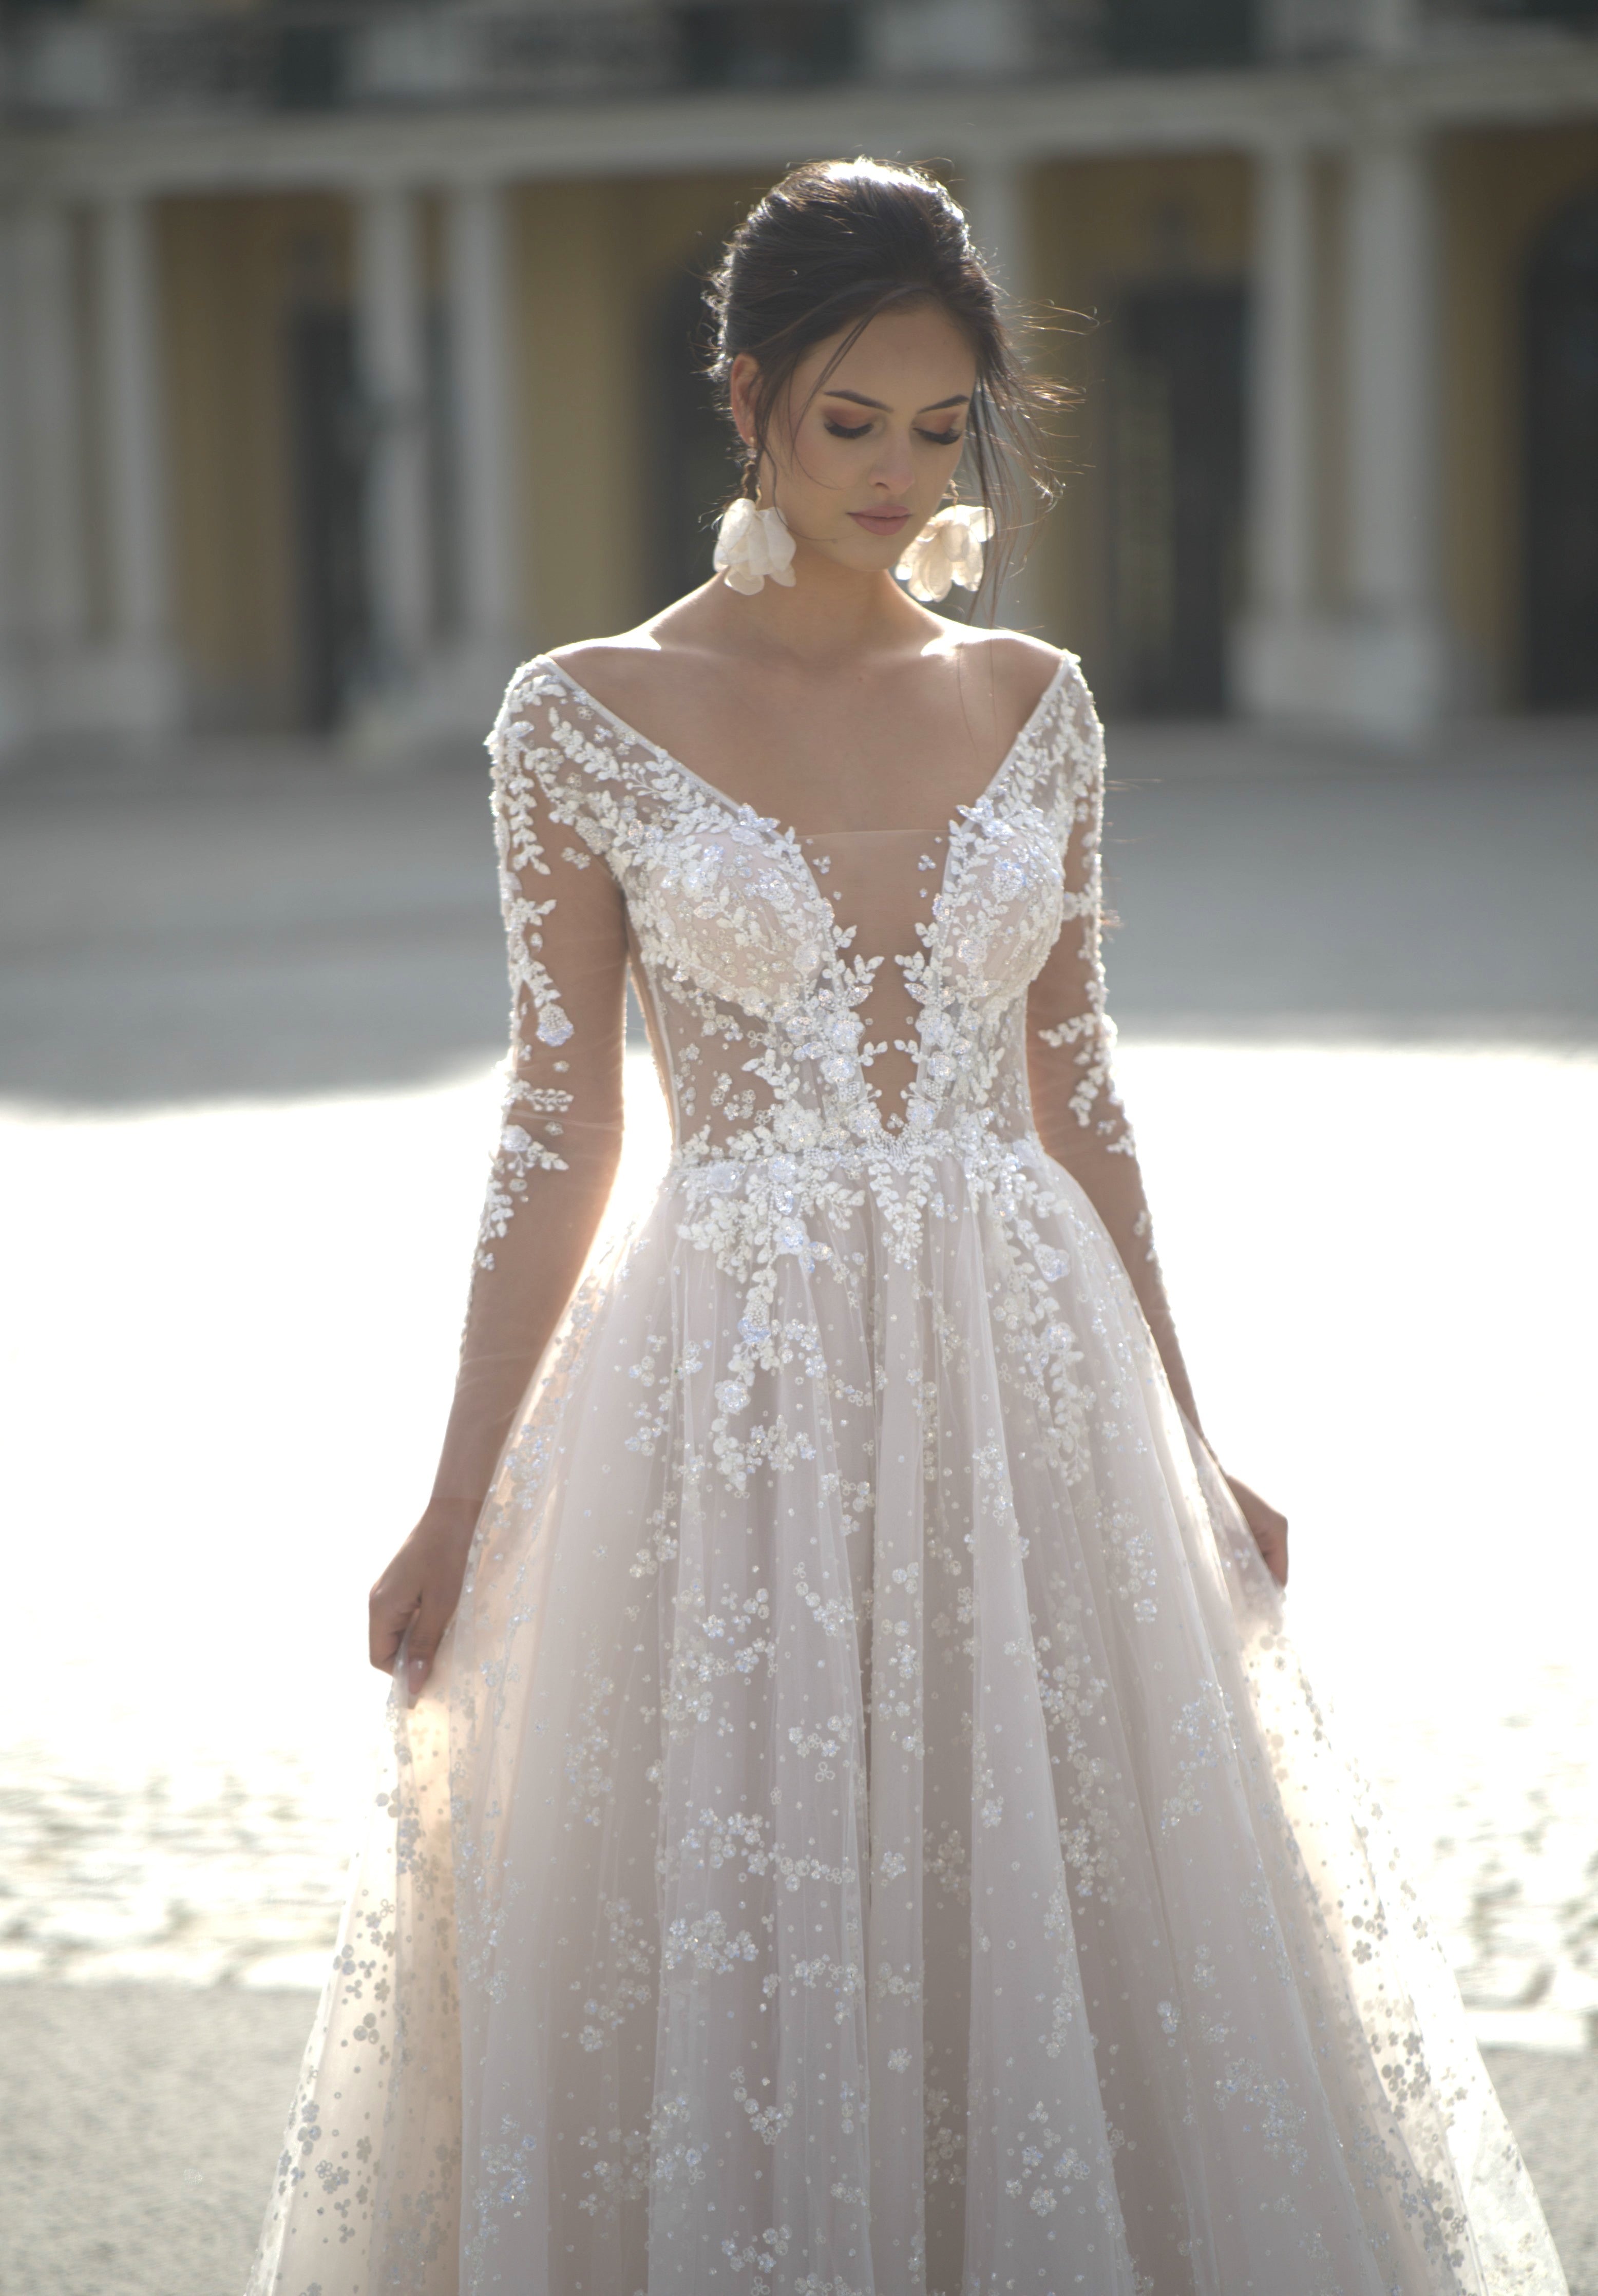 Alexandra - Long Sleeve Tulle Wedding Dress with Lace